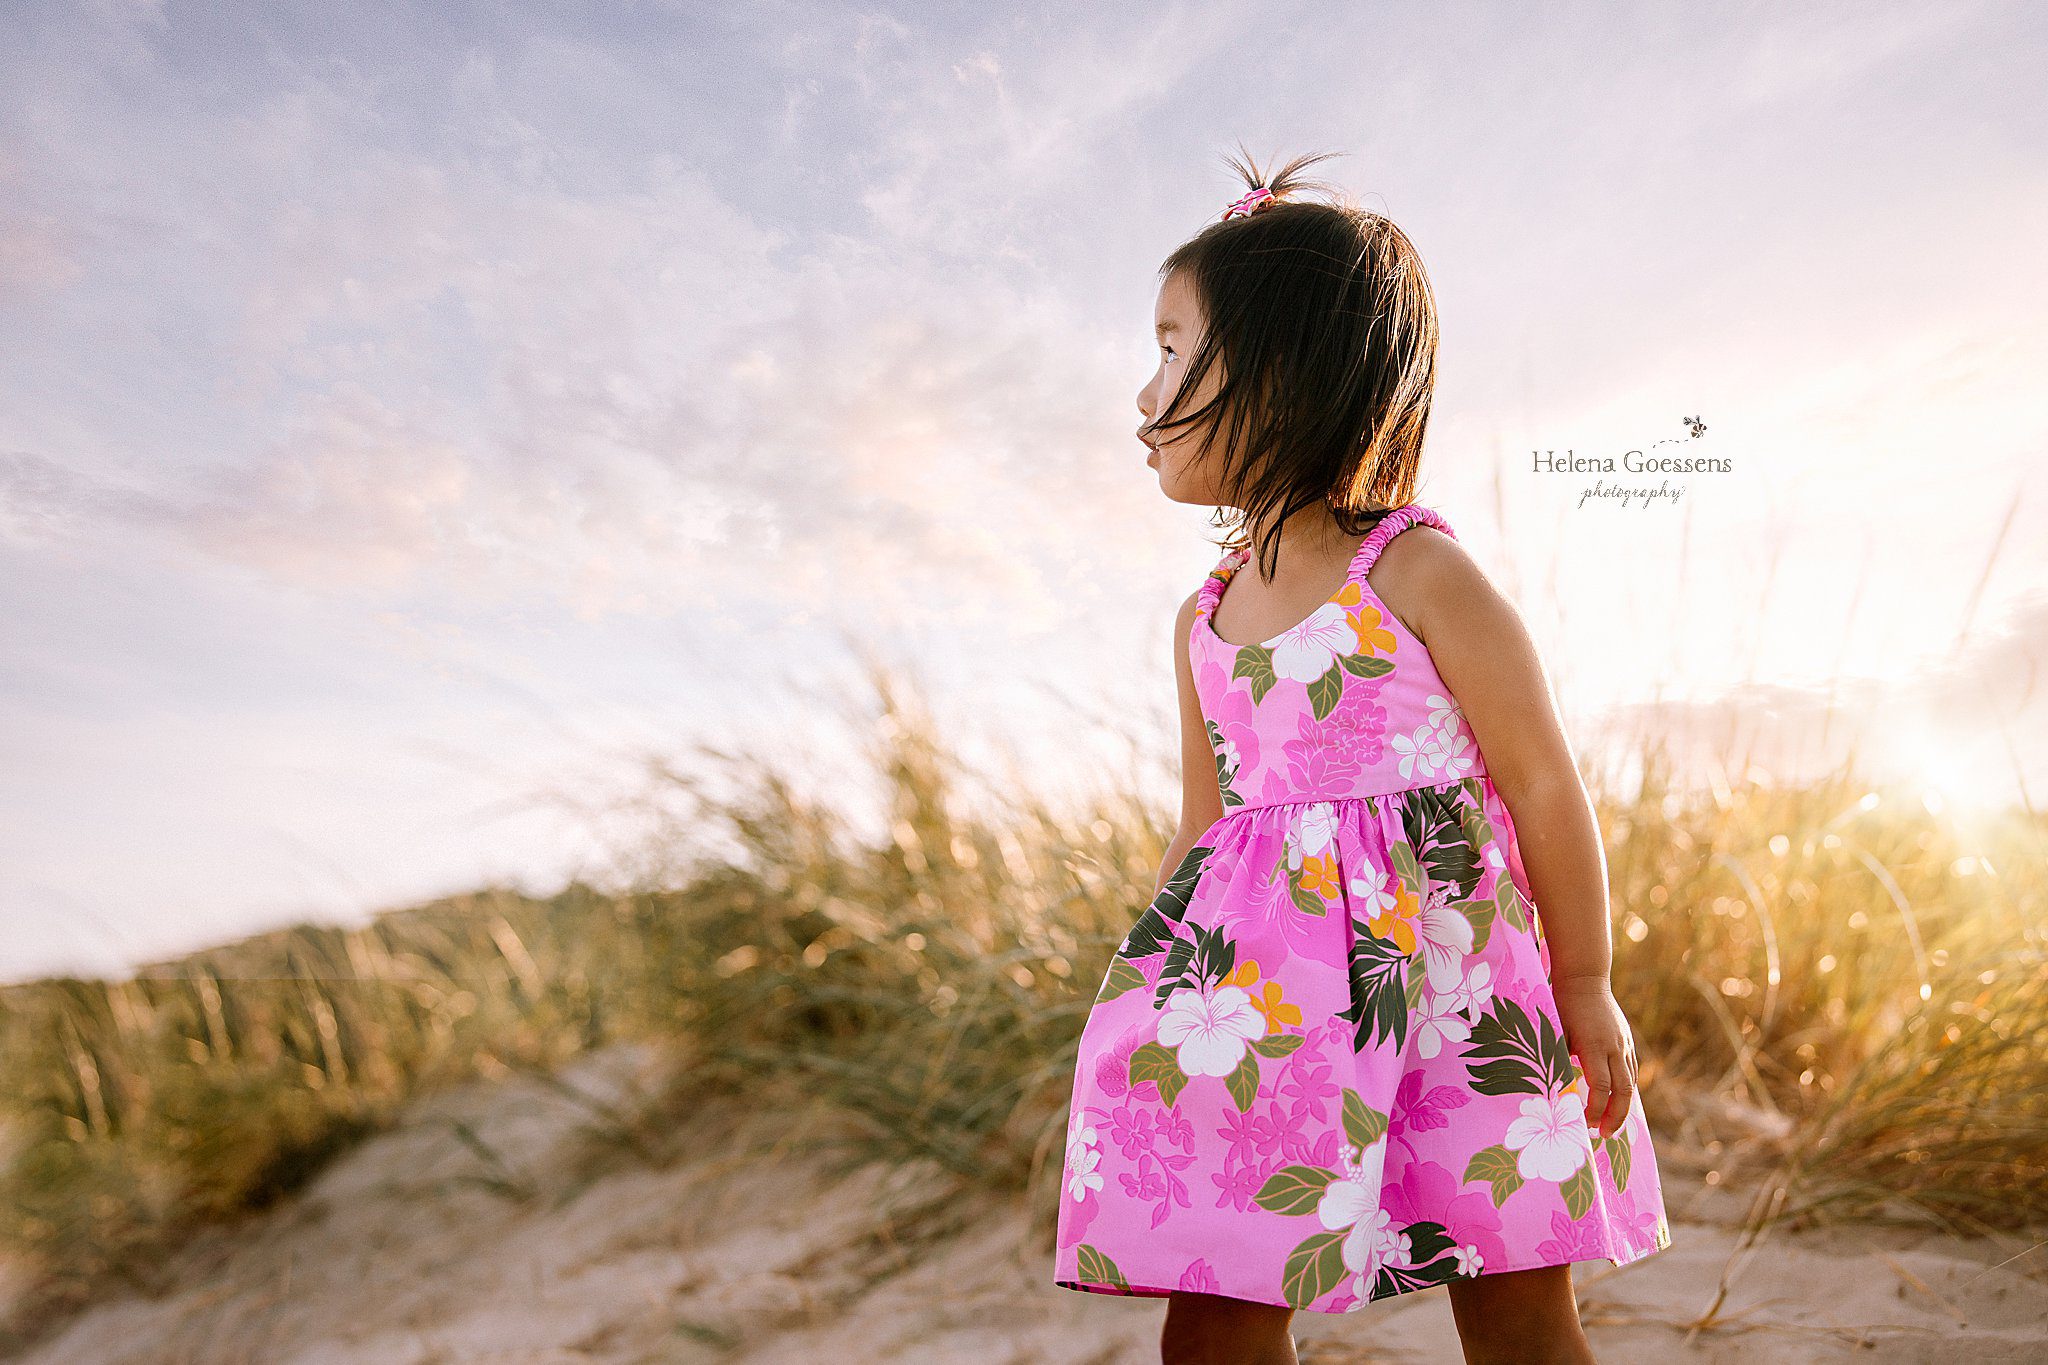 Helena Goessens Photography photographs toddler at sunset on Rexhame Beach